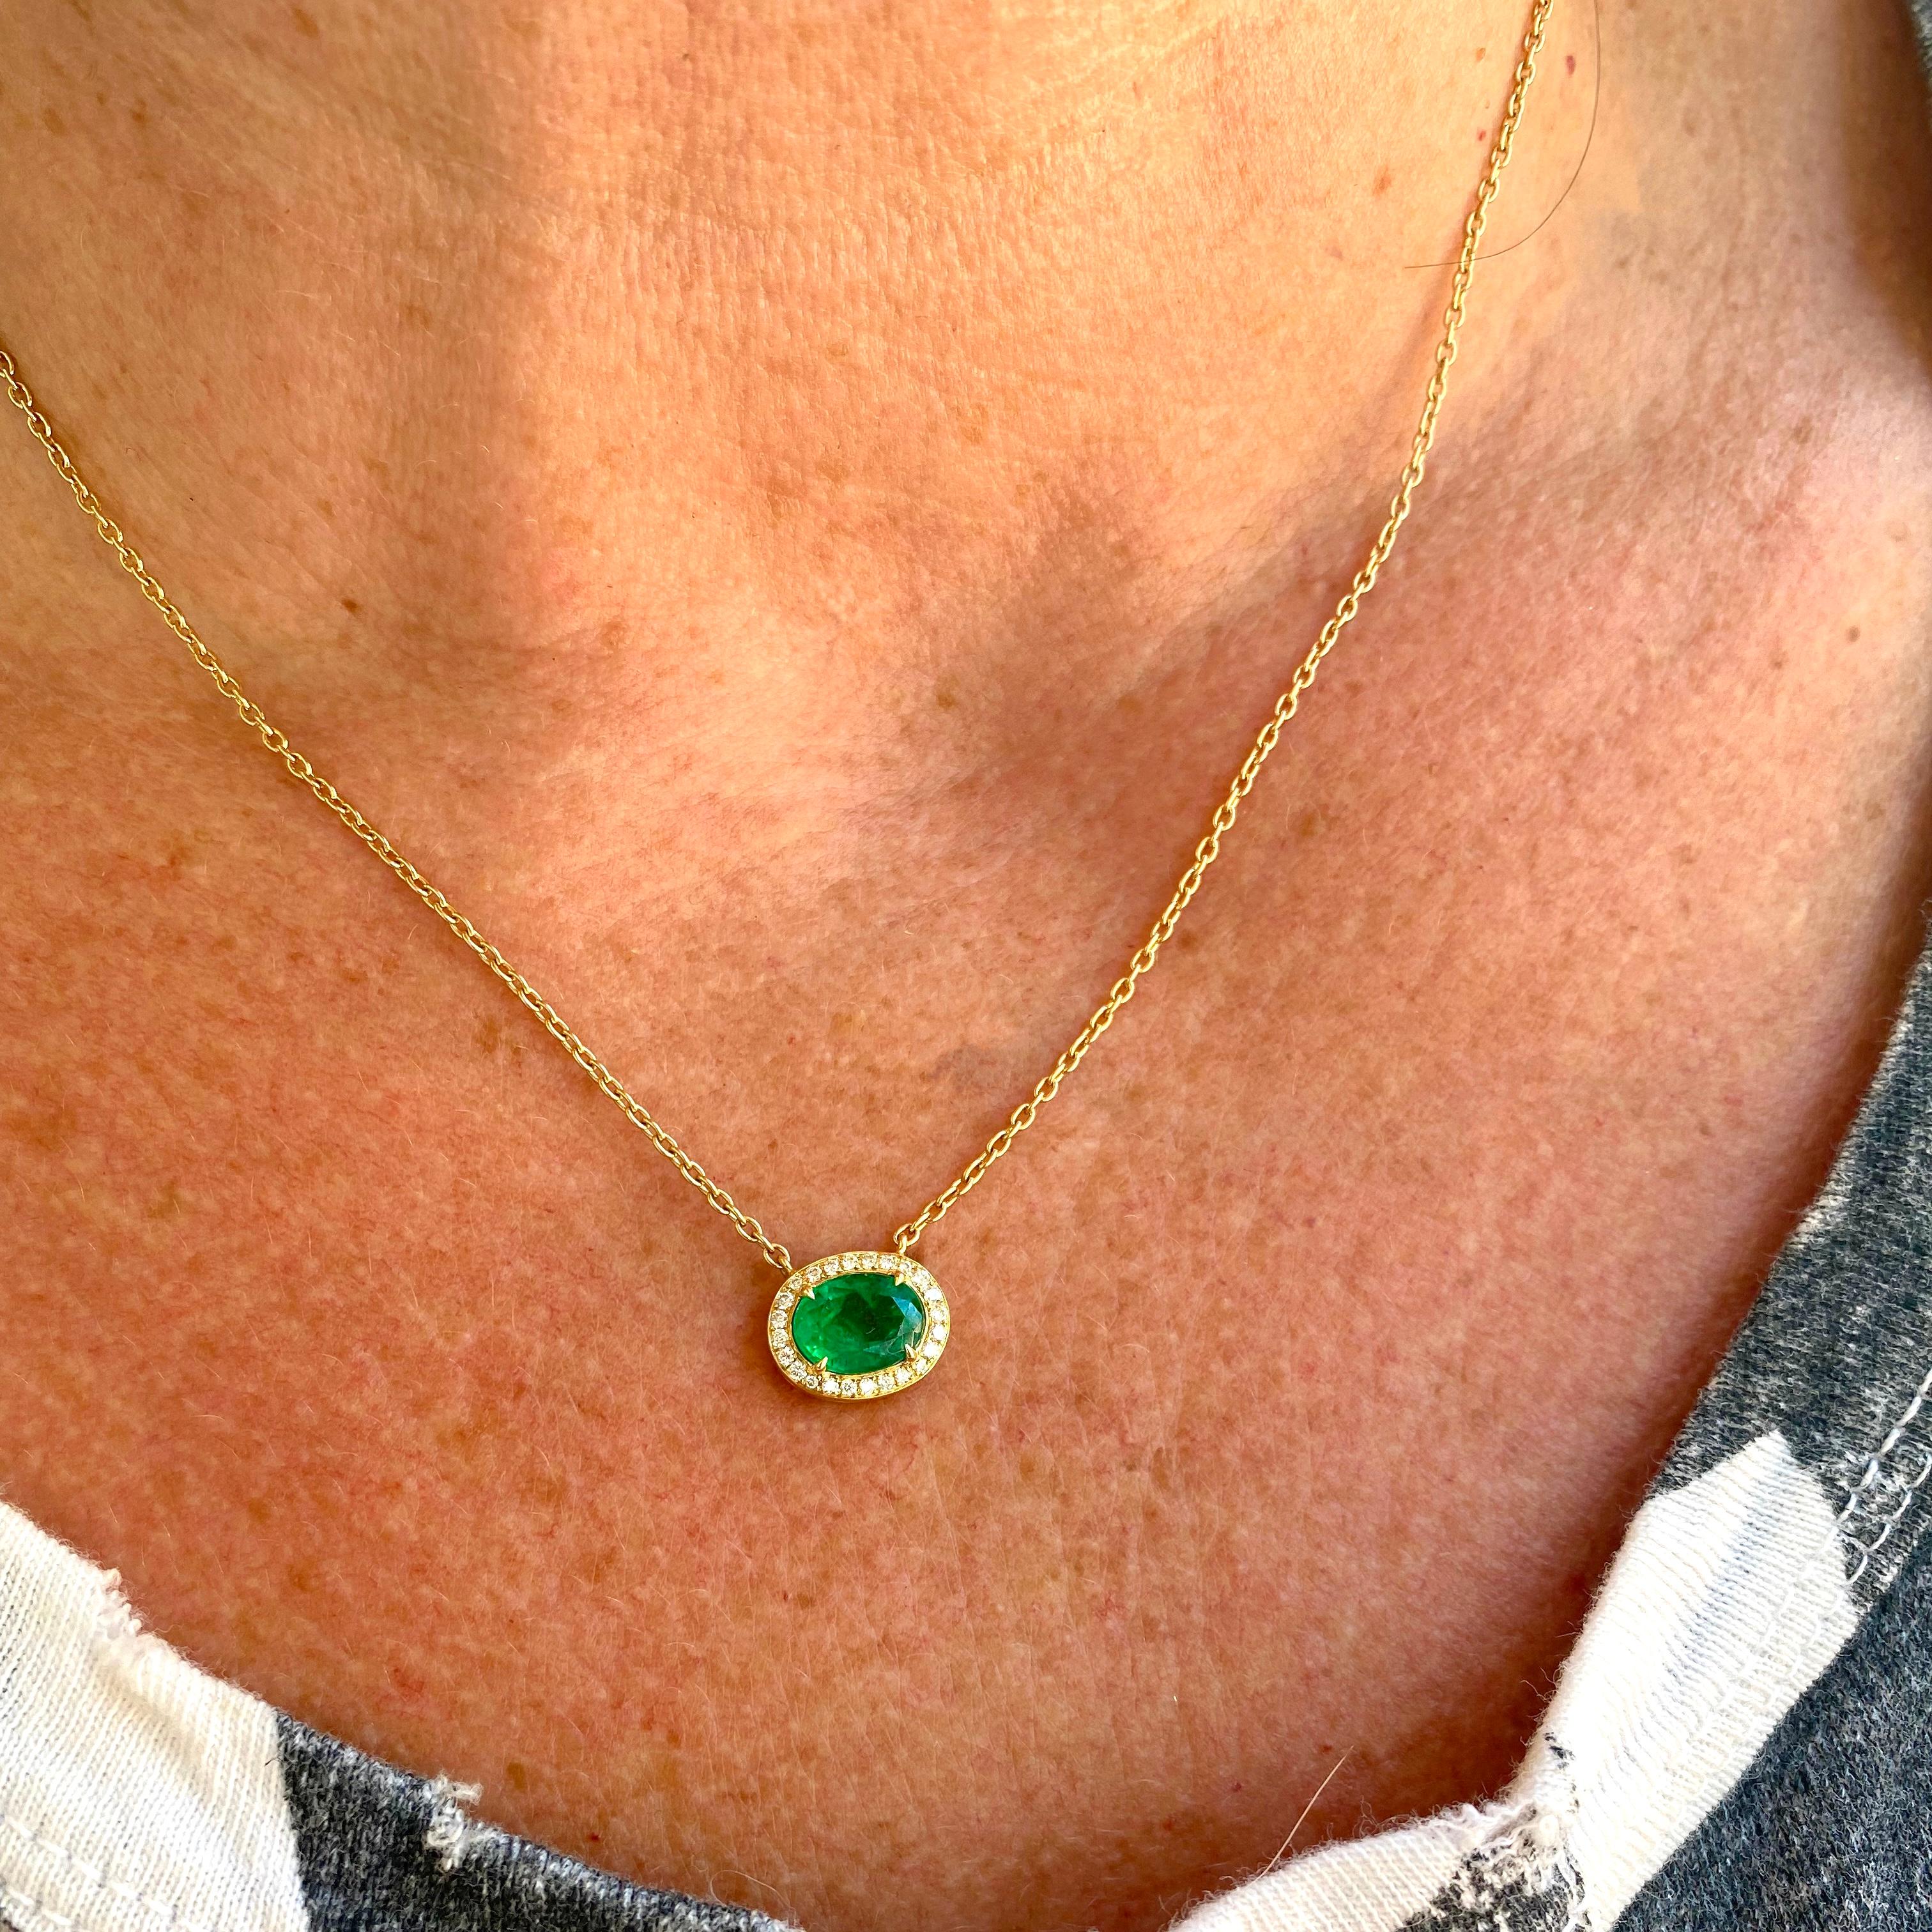 Green glory! This 18k yellow gold necklace is designed with an east-west set vibrant oval emerald weighing 1.43 carats, with a frame of round brilliant-cut diamonds weighing in total 0.14-ct. The necklace weighs 5.1 grams, and can be worn at 16, 17,